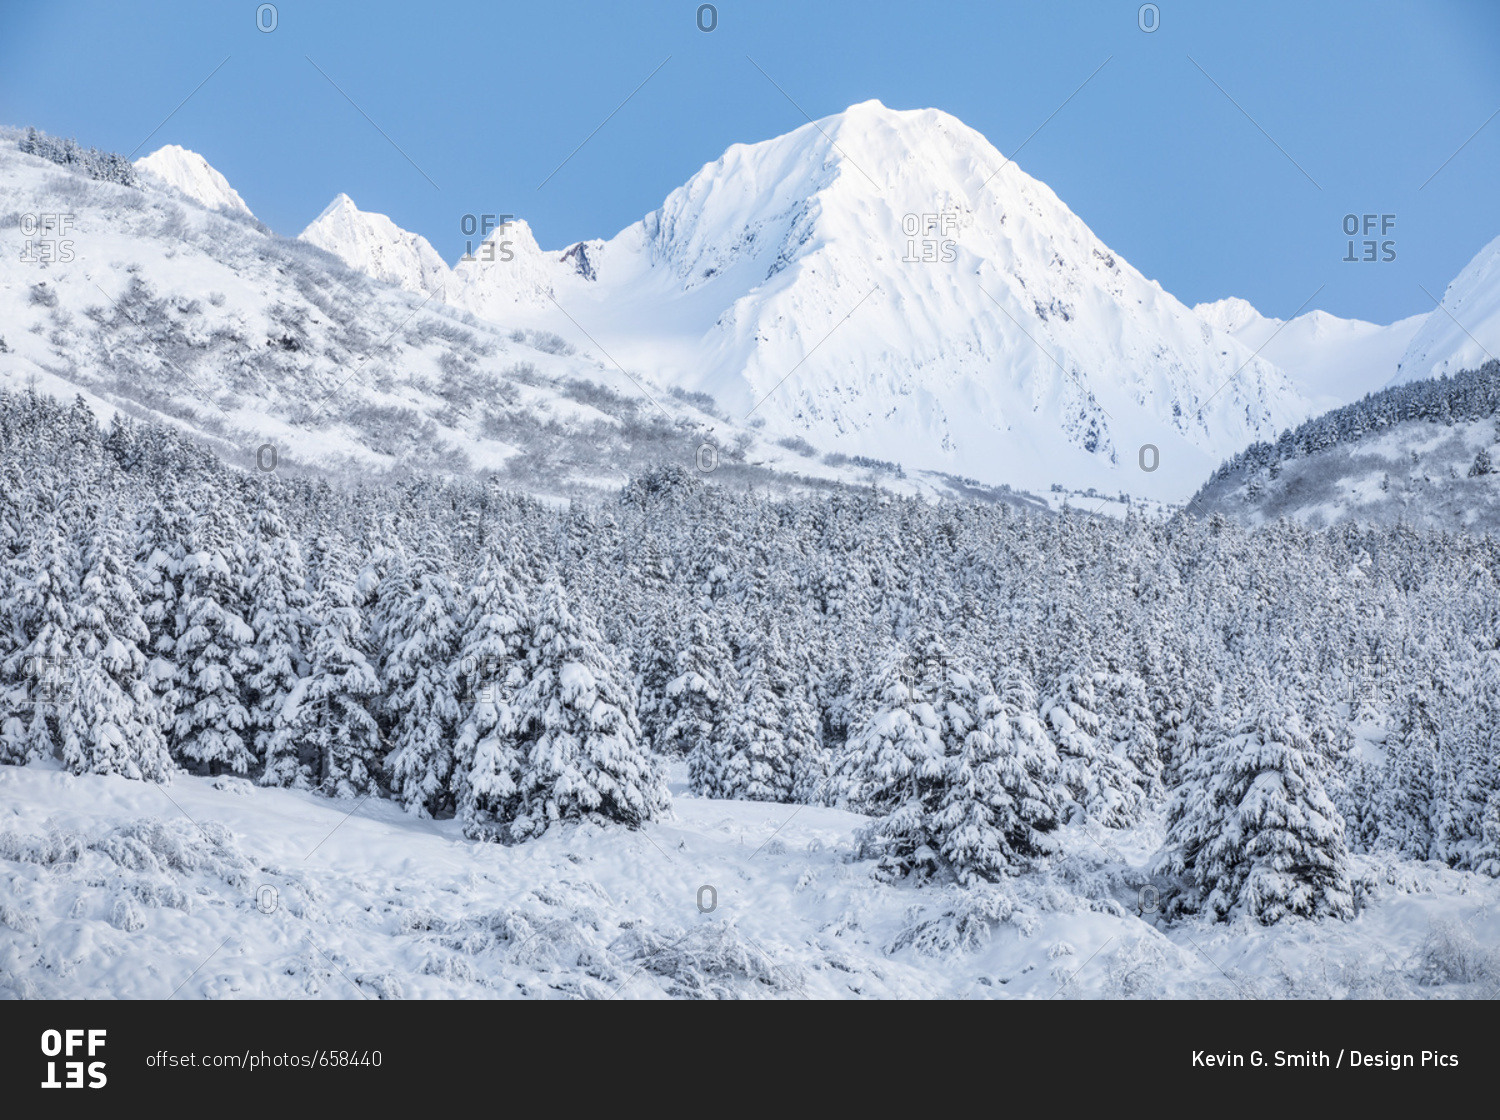 Black spruce trees covered in fresh snow blanketing the foreground with snow-covered rugged mountain peaks in the background, Turnagain Pass, South-central Alaska; Moose Pass, Alaska, United States of America